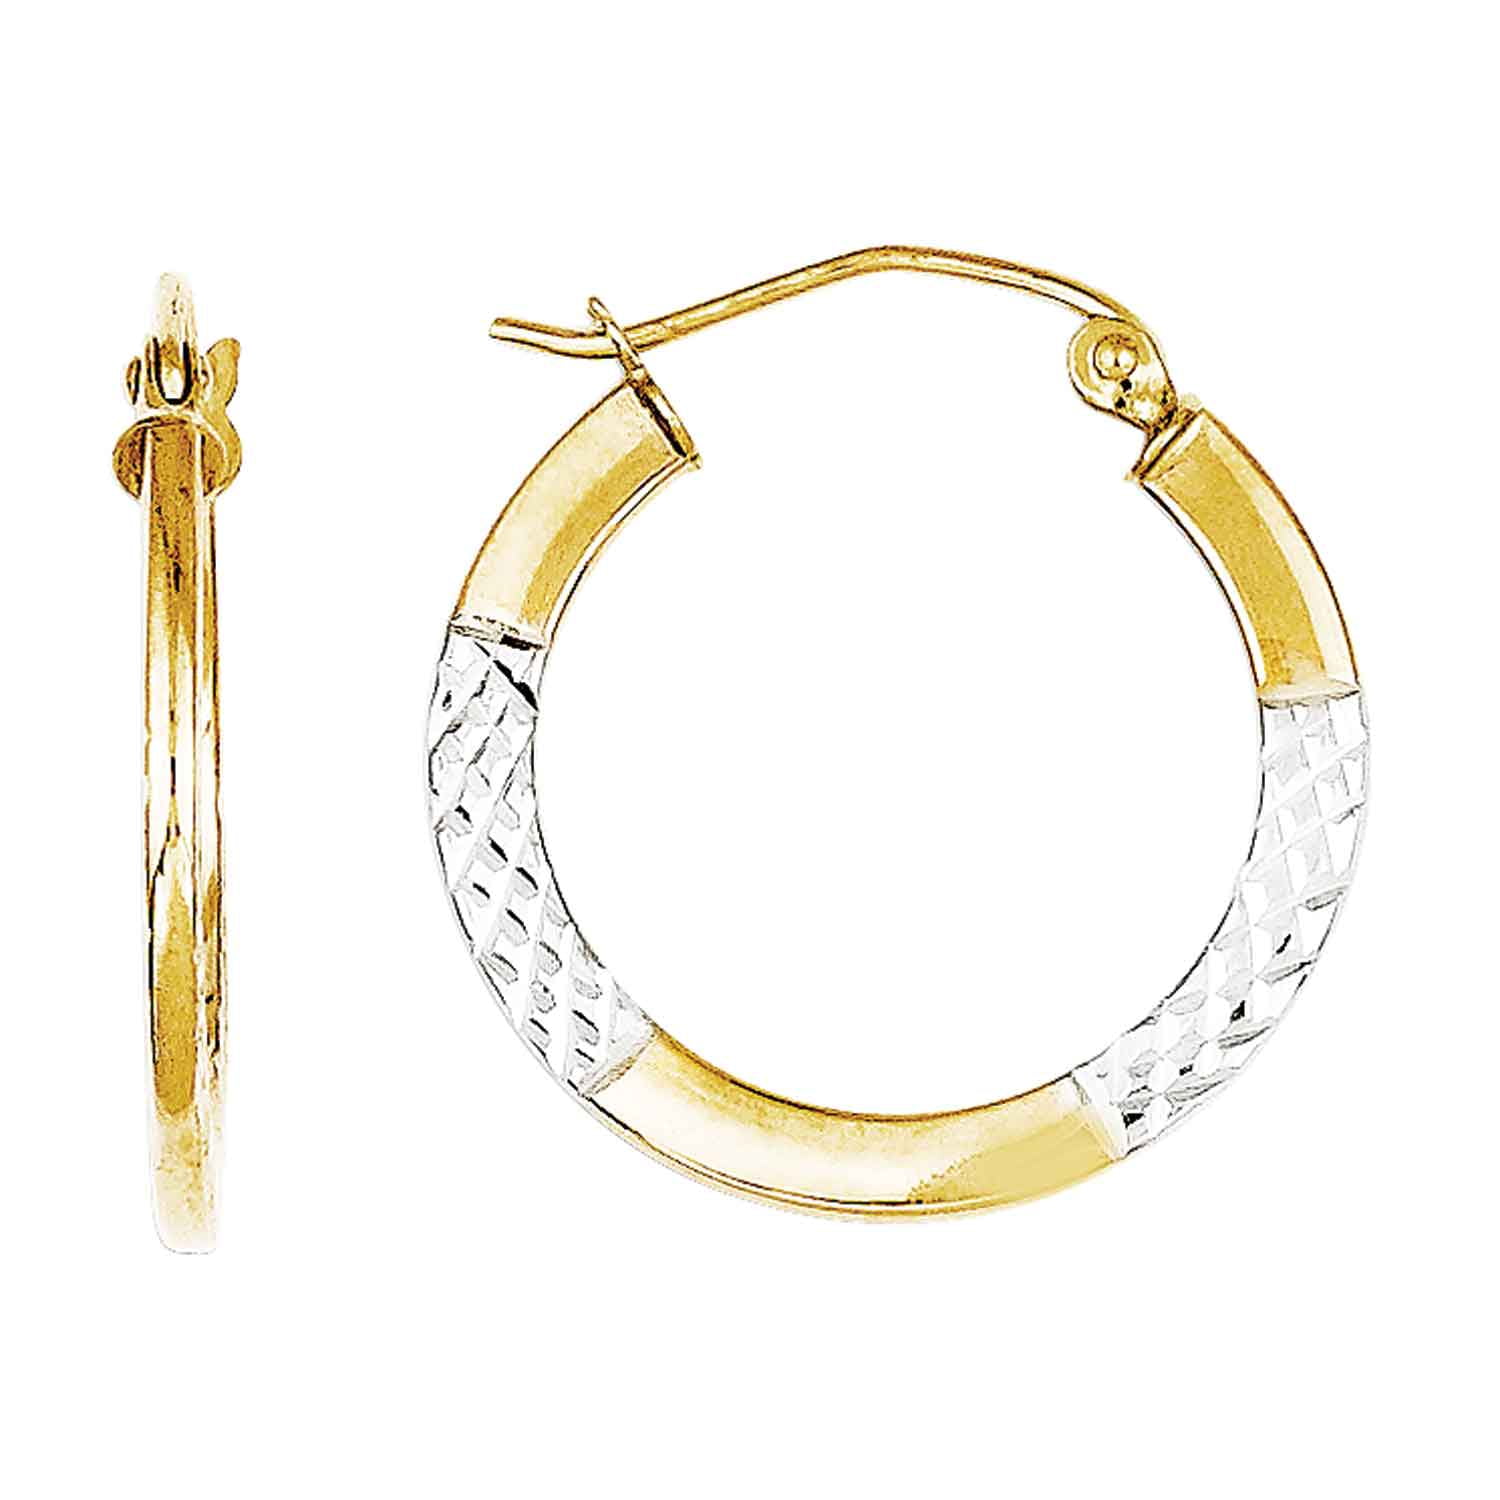 21x20mm 10k Yellow Gold and Rhodium Plated Diamond Cut 2.5x20mm Hoop Earrings Ideal For Women